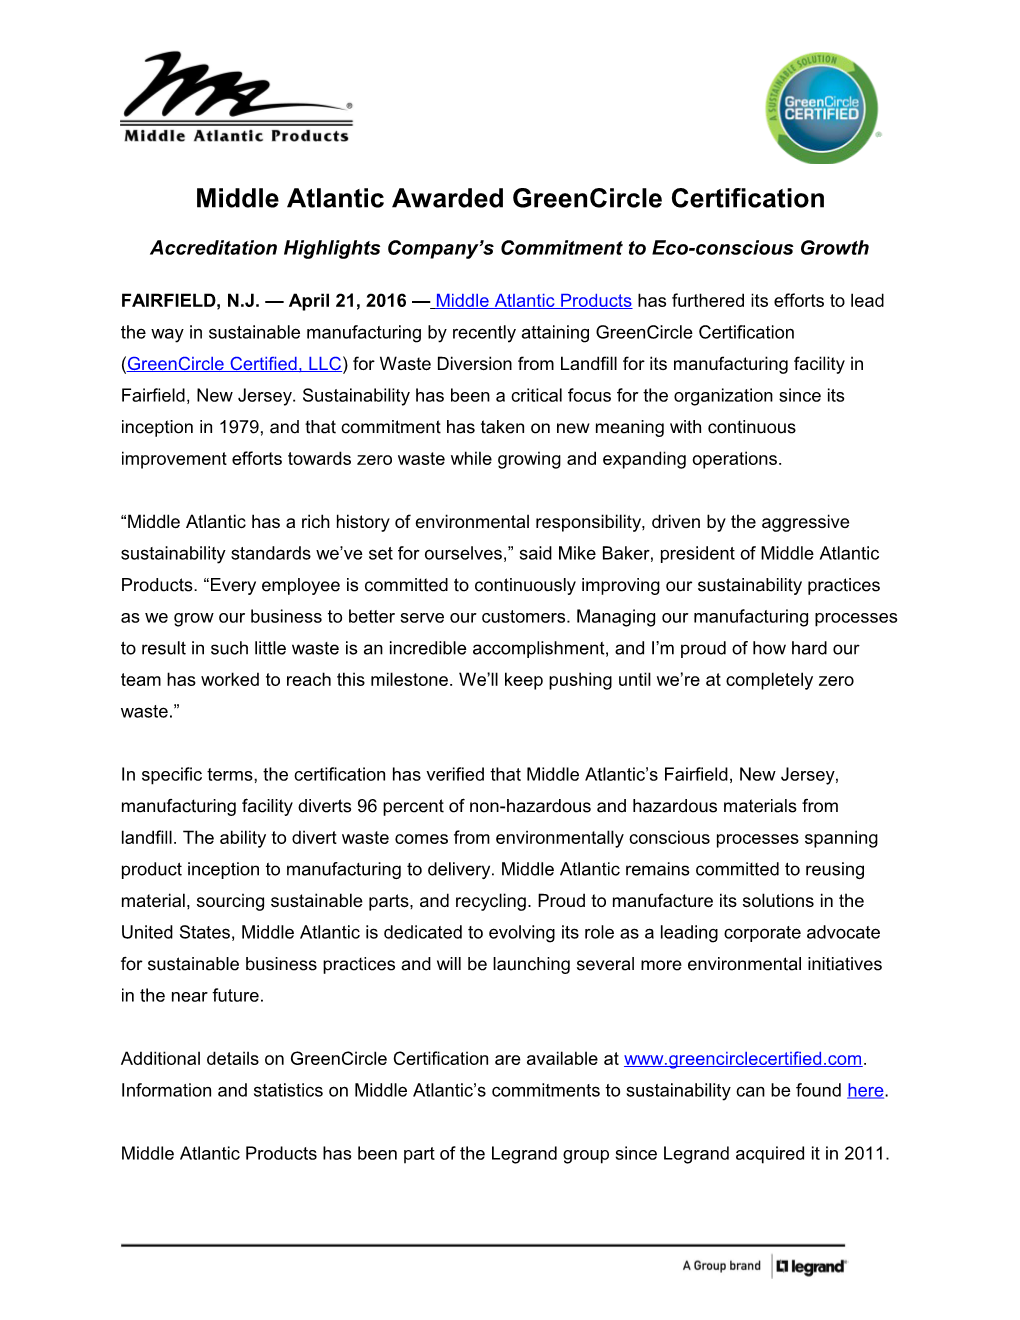 Middle Atlantic Awarded Greencircle Certification